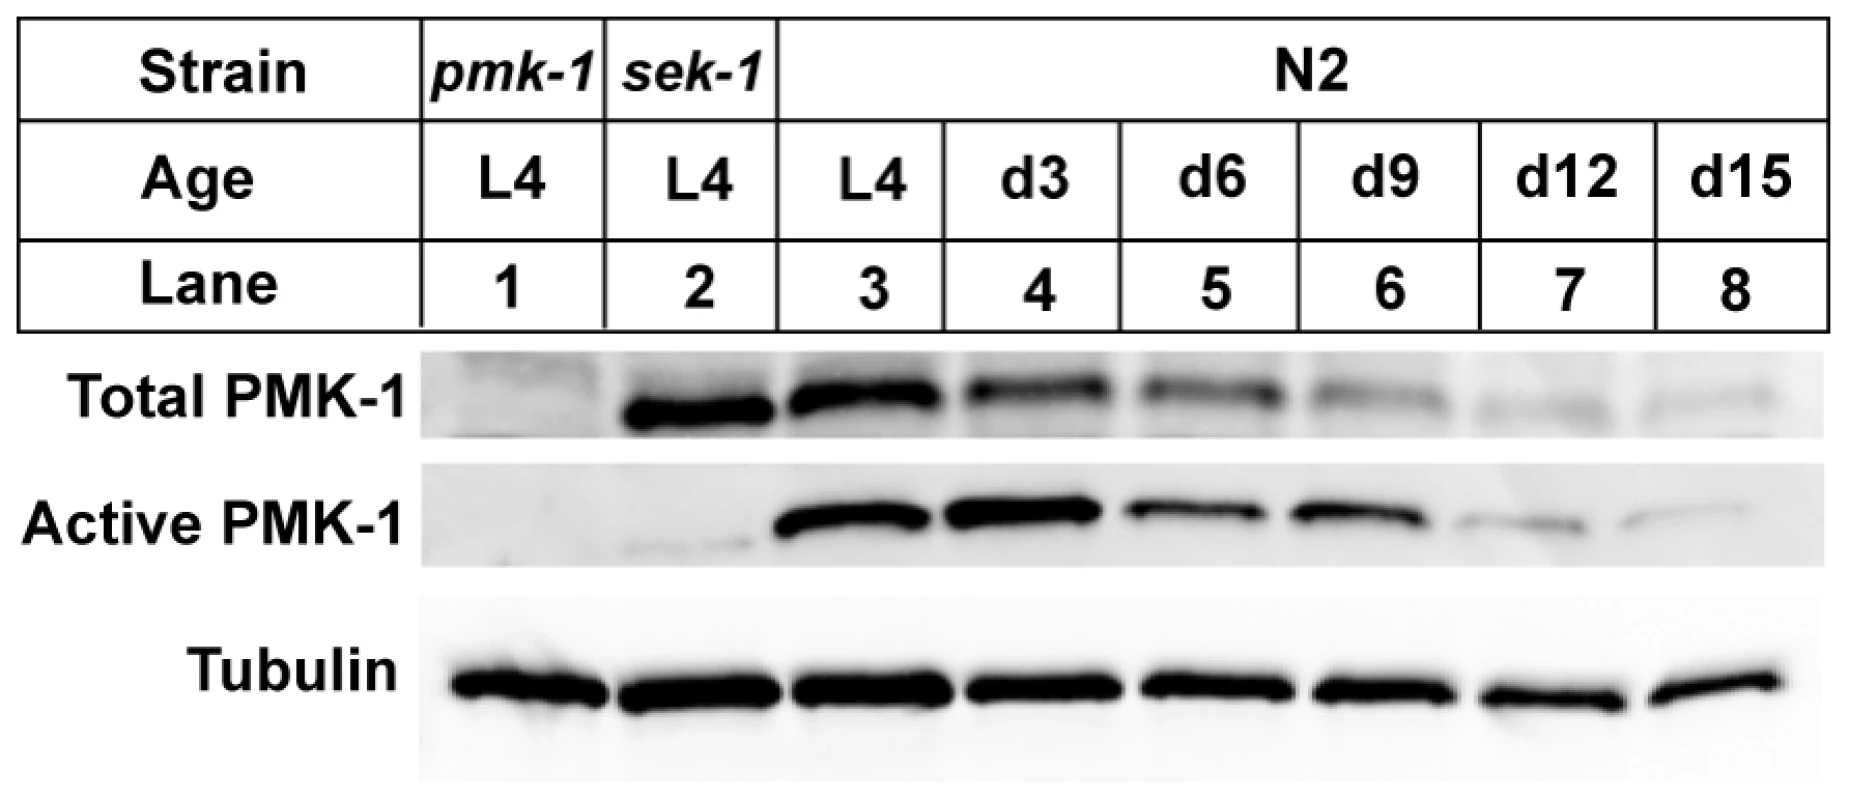 A gradual reduction in the levels of total and activated PMK-1 protein throughout adulthood in <i>C. elegans</i>.